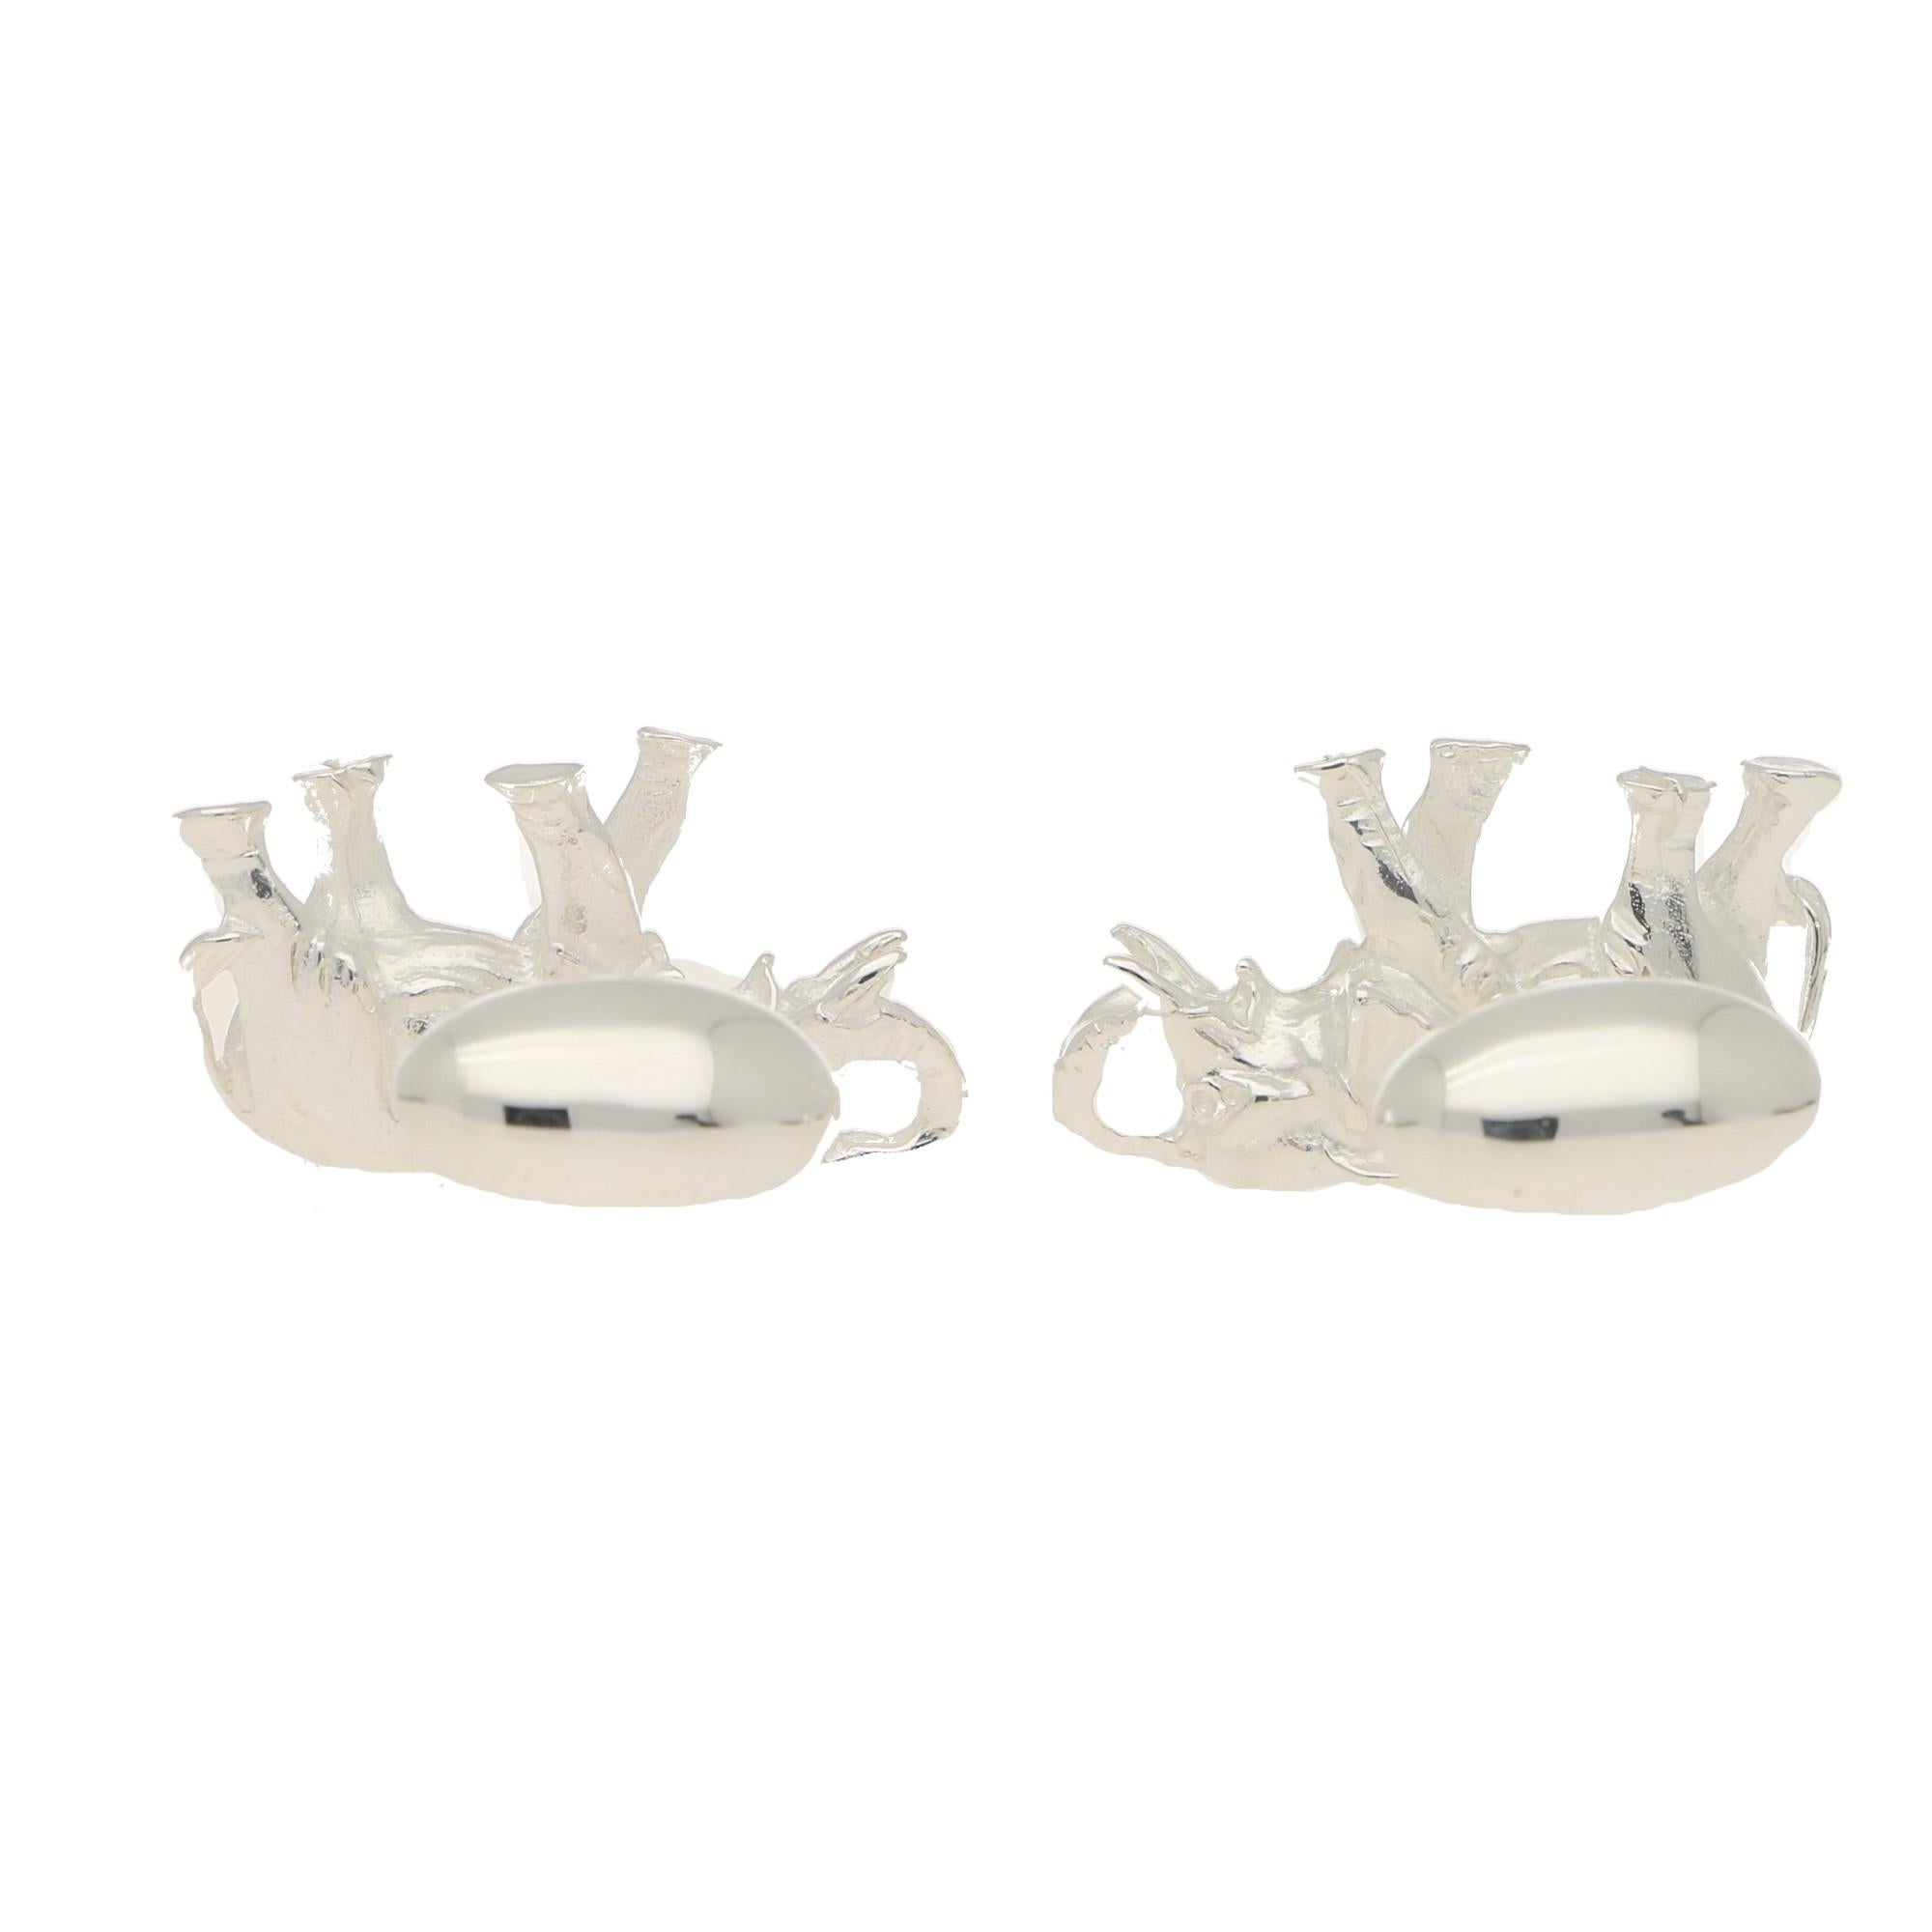 A beautifully detailed pair of elephant swivel back cufflinks in solid sterling silver.

Each cufflink depicts a walking elephant with its trunk in the air – a common symbol of good luck. The elephants have been hand crafted and have individual